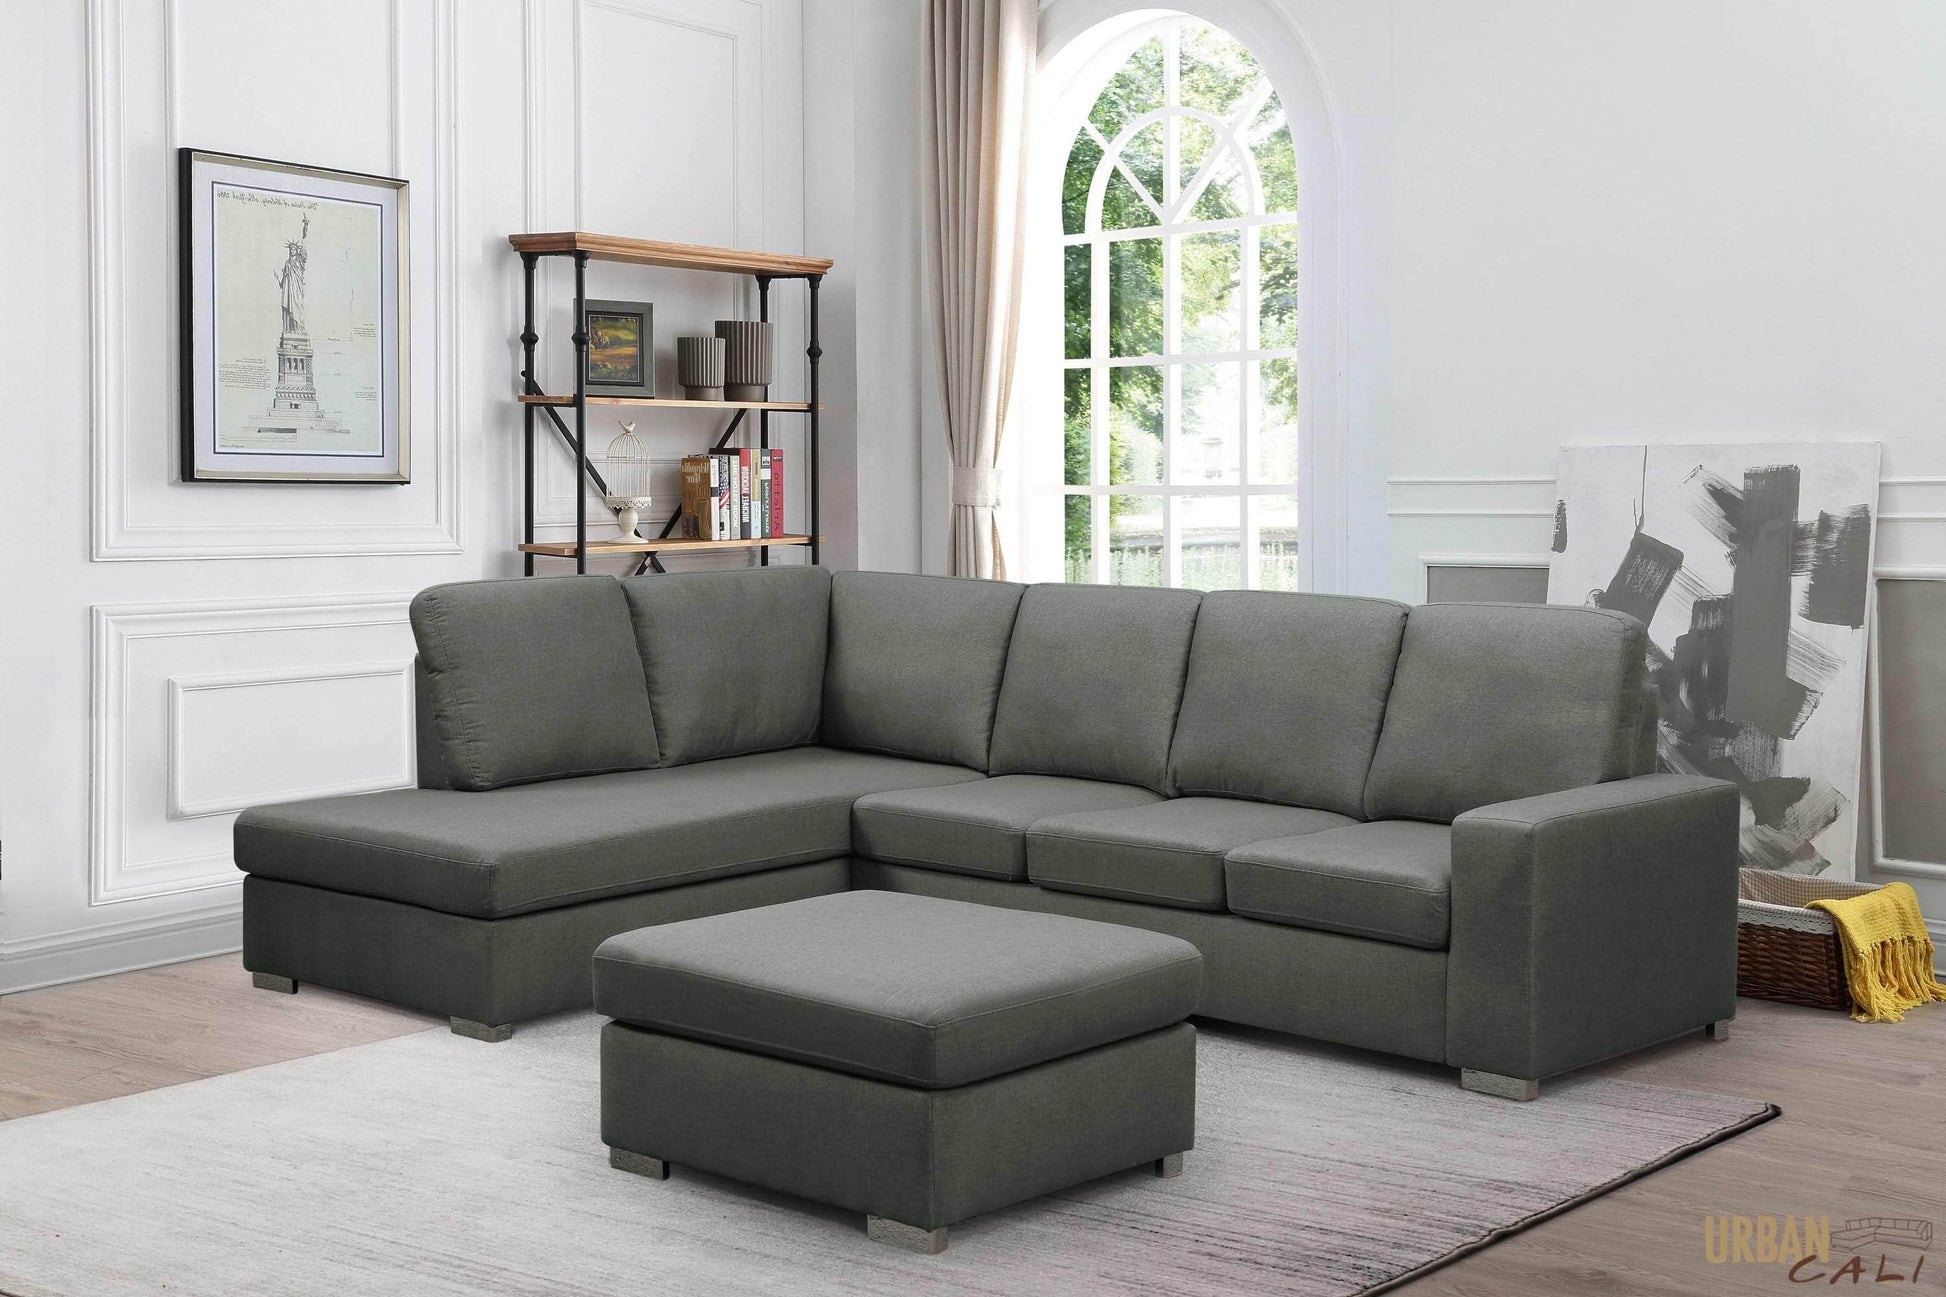 Urban Cali Sectional Ventura 110.25" Wide Linen Sectional Sofa with Ottoman in Dark Grey - Available in 2 Configurations